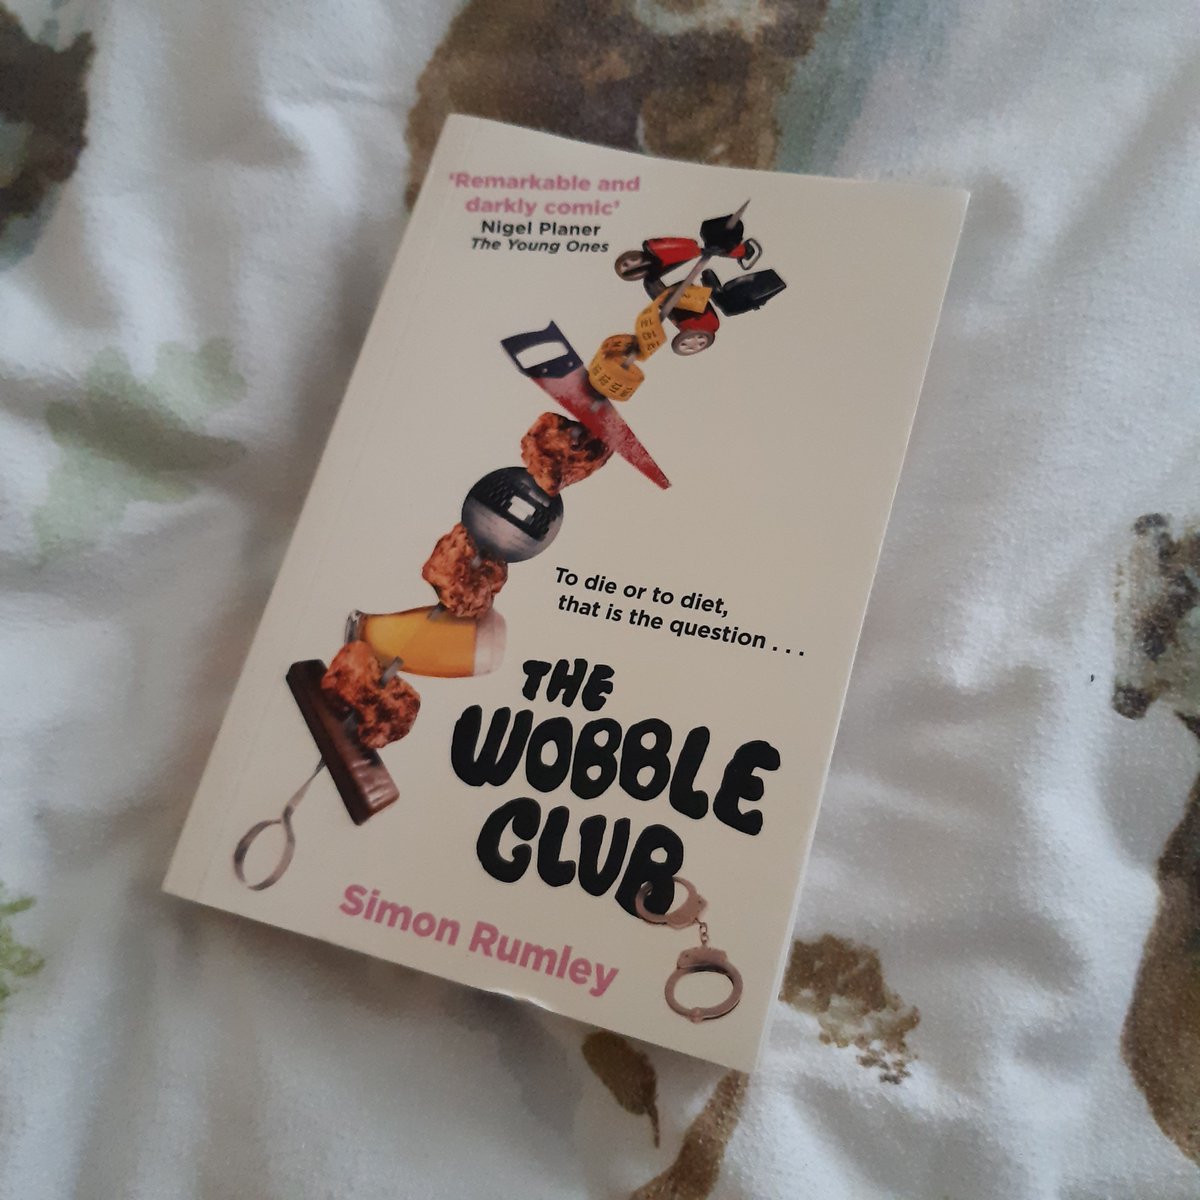 #FindJoyInEveryDay - Day 8/366: Soon, I'll begin my @BookshelfOtter project. The backing I've had for this means a lot to me, & when I get the idea to buy @simon_rumley's The Wobble Club from @BrittPfluger, it reminds me of all the great books in my TBR, I can't wait to read. 📚